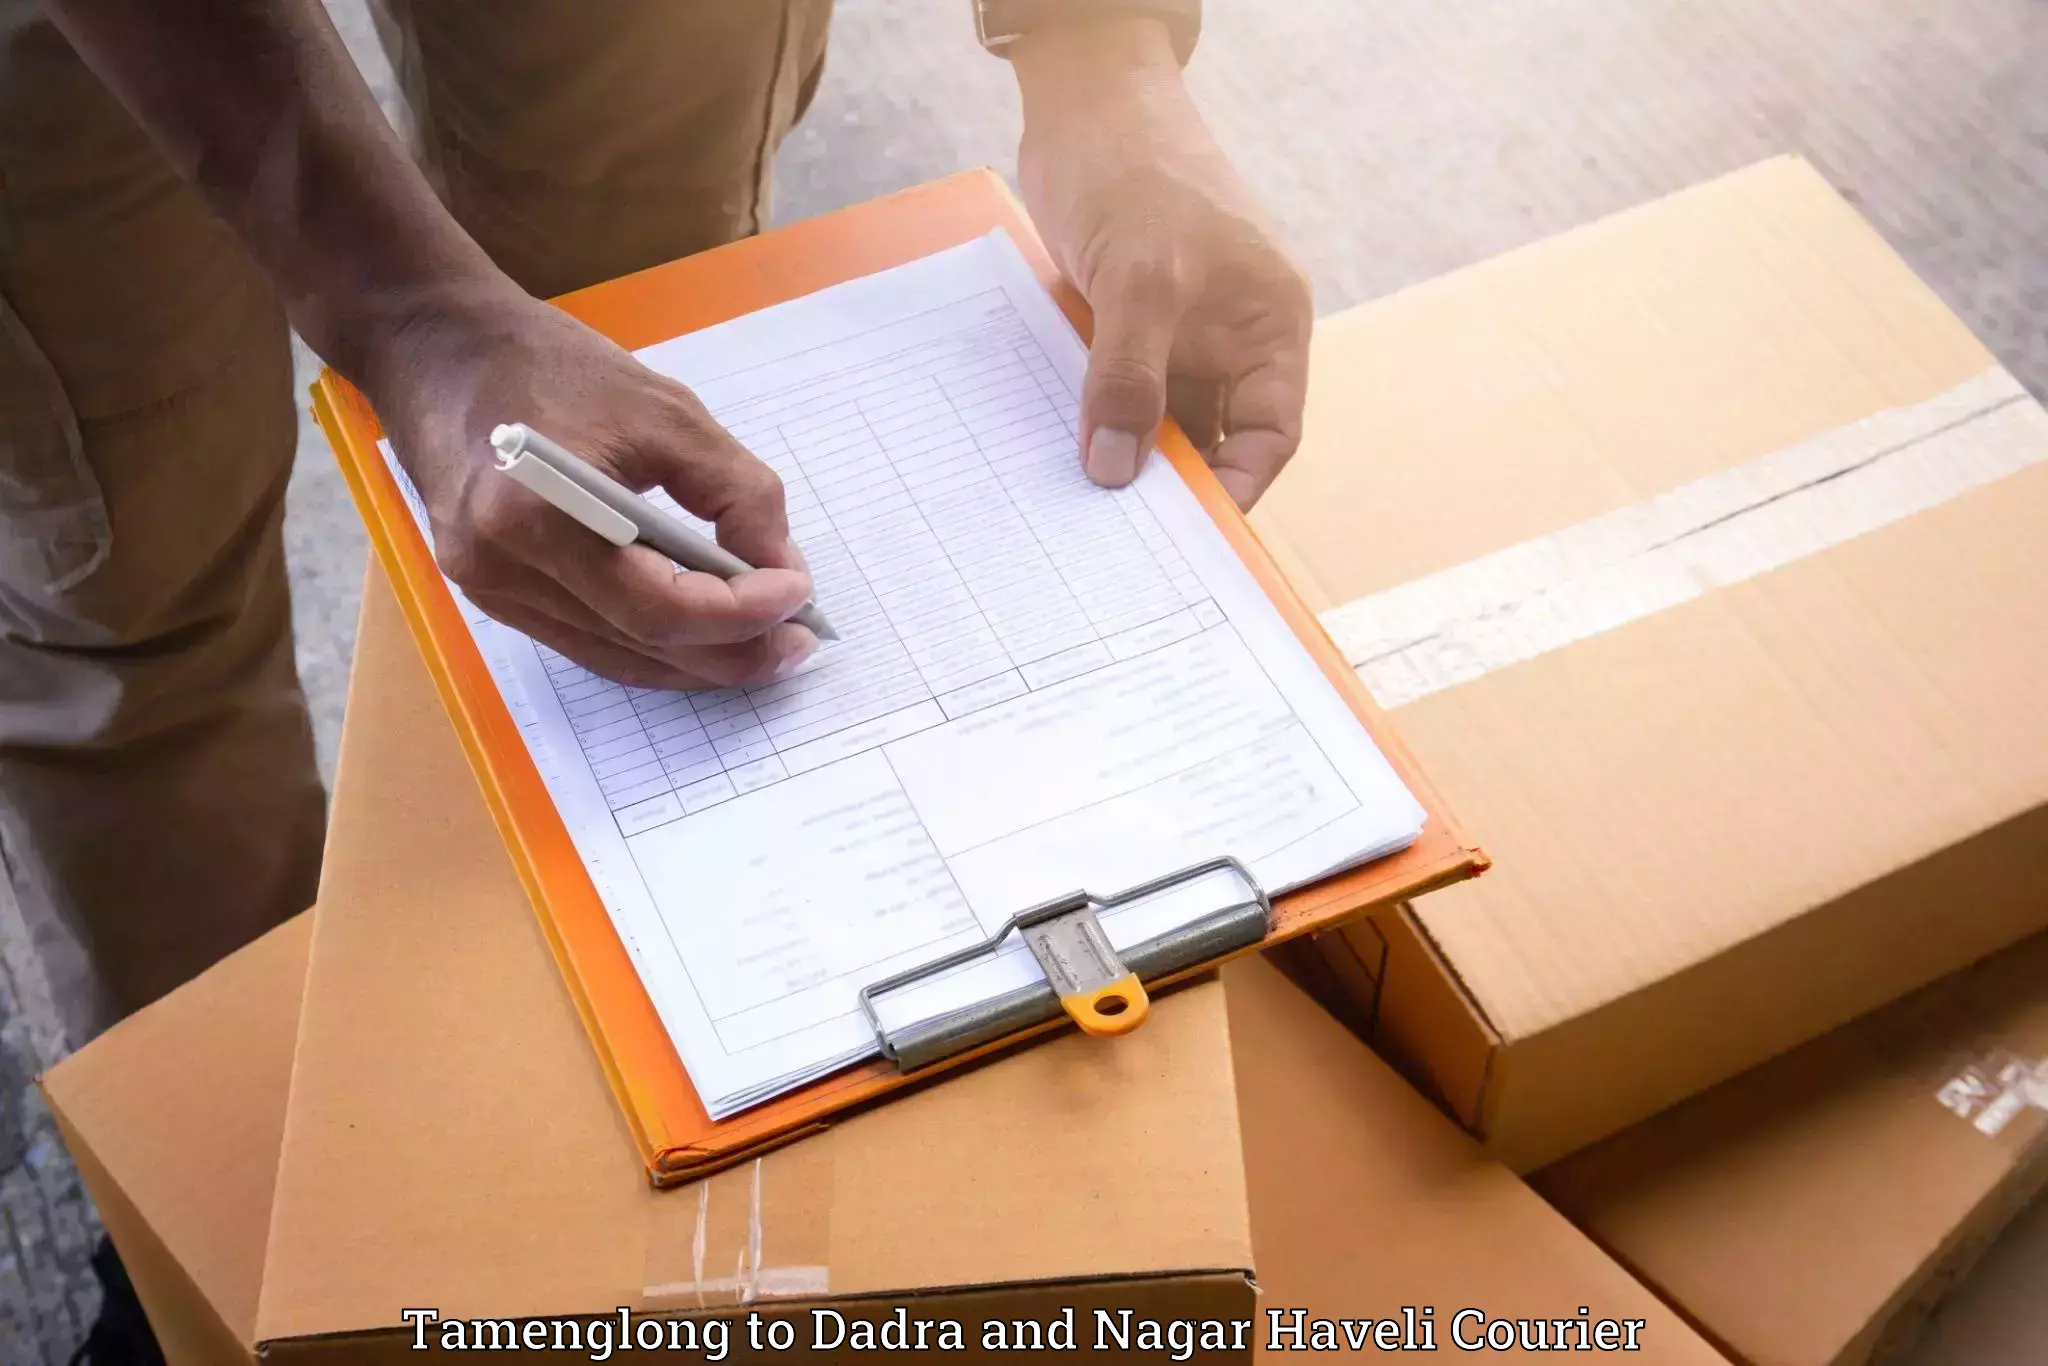 Trusted relocation experts Tamenglong to Dadra and Nagar Haveli